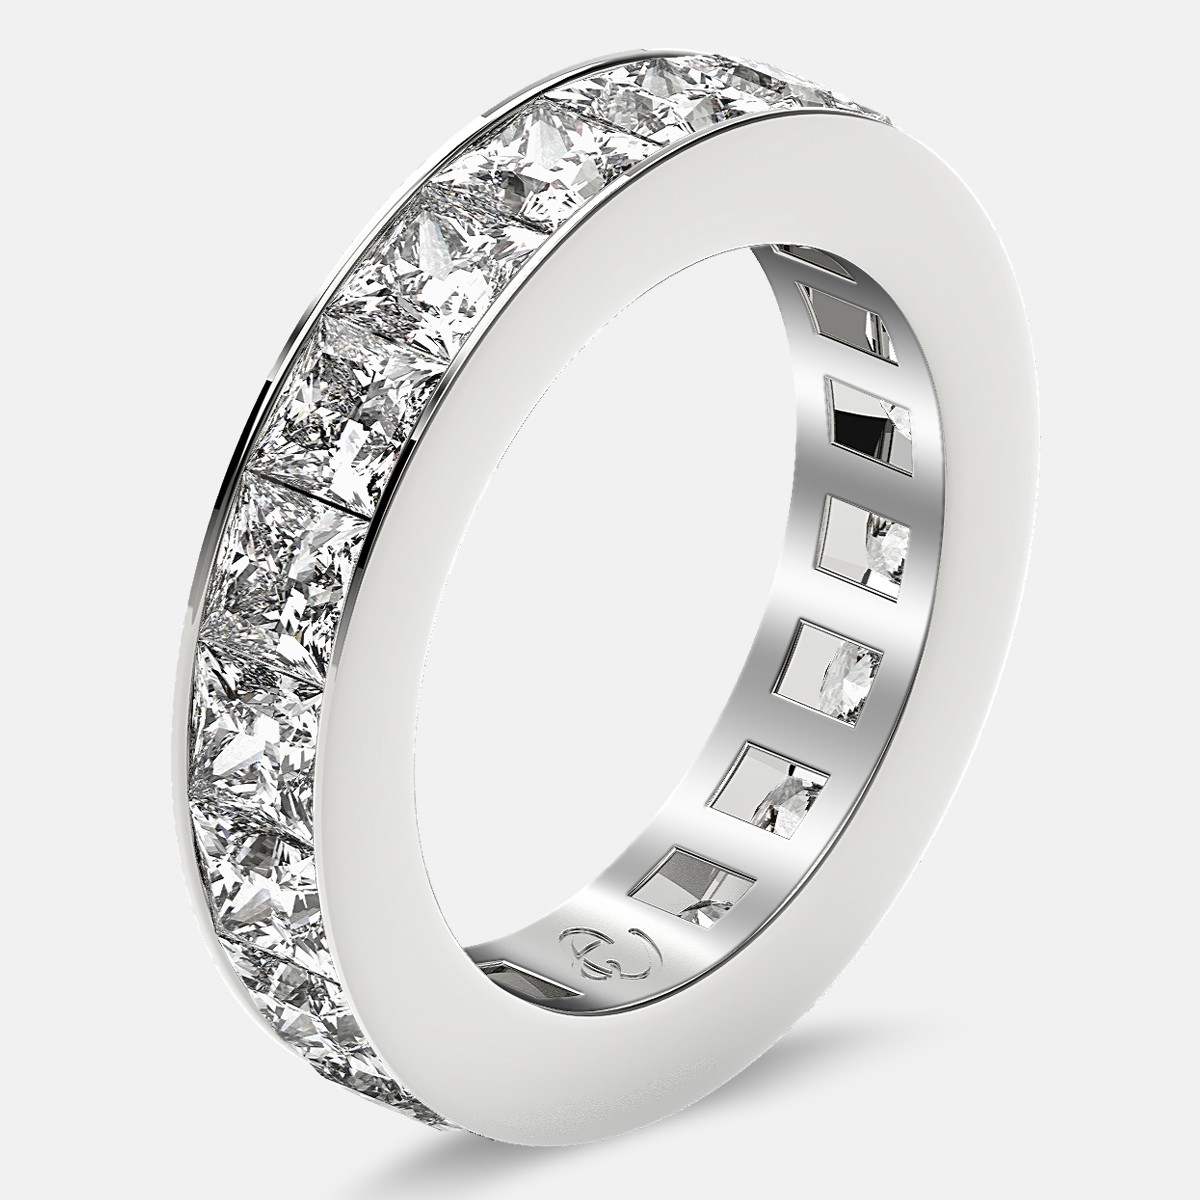 Eternity Ring with Channel Set Princess Cut Diamonds in 18k White Gold